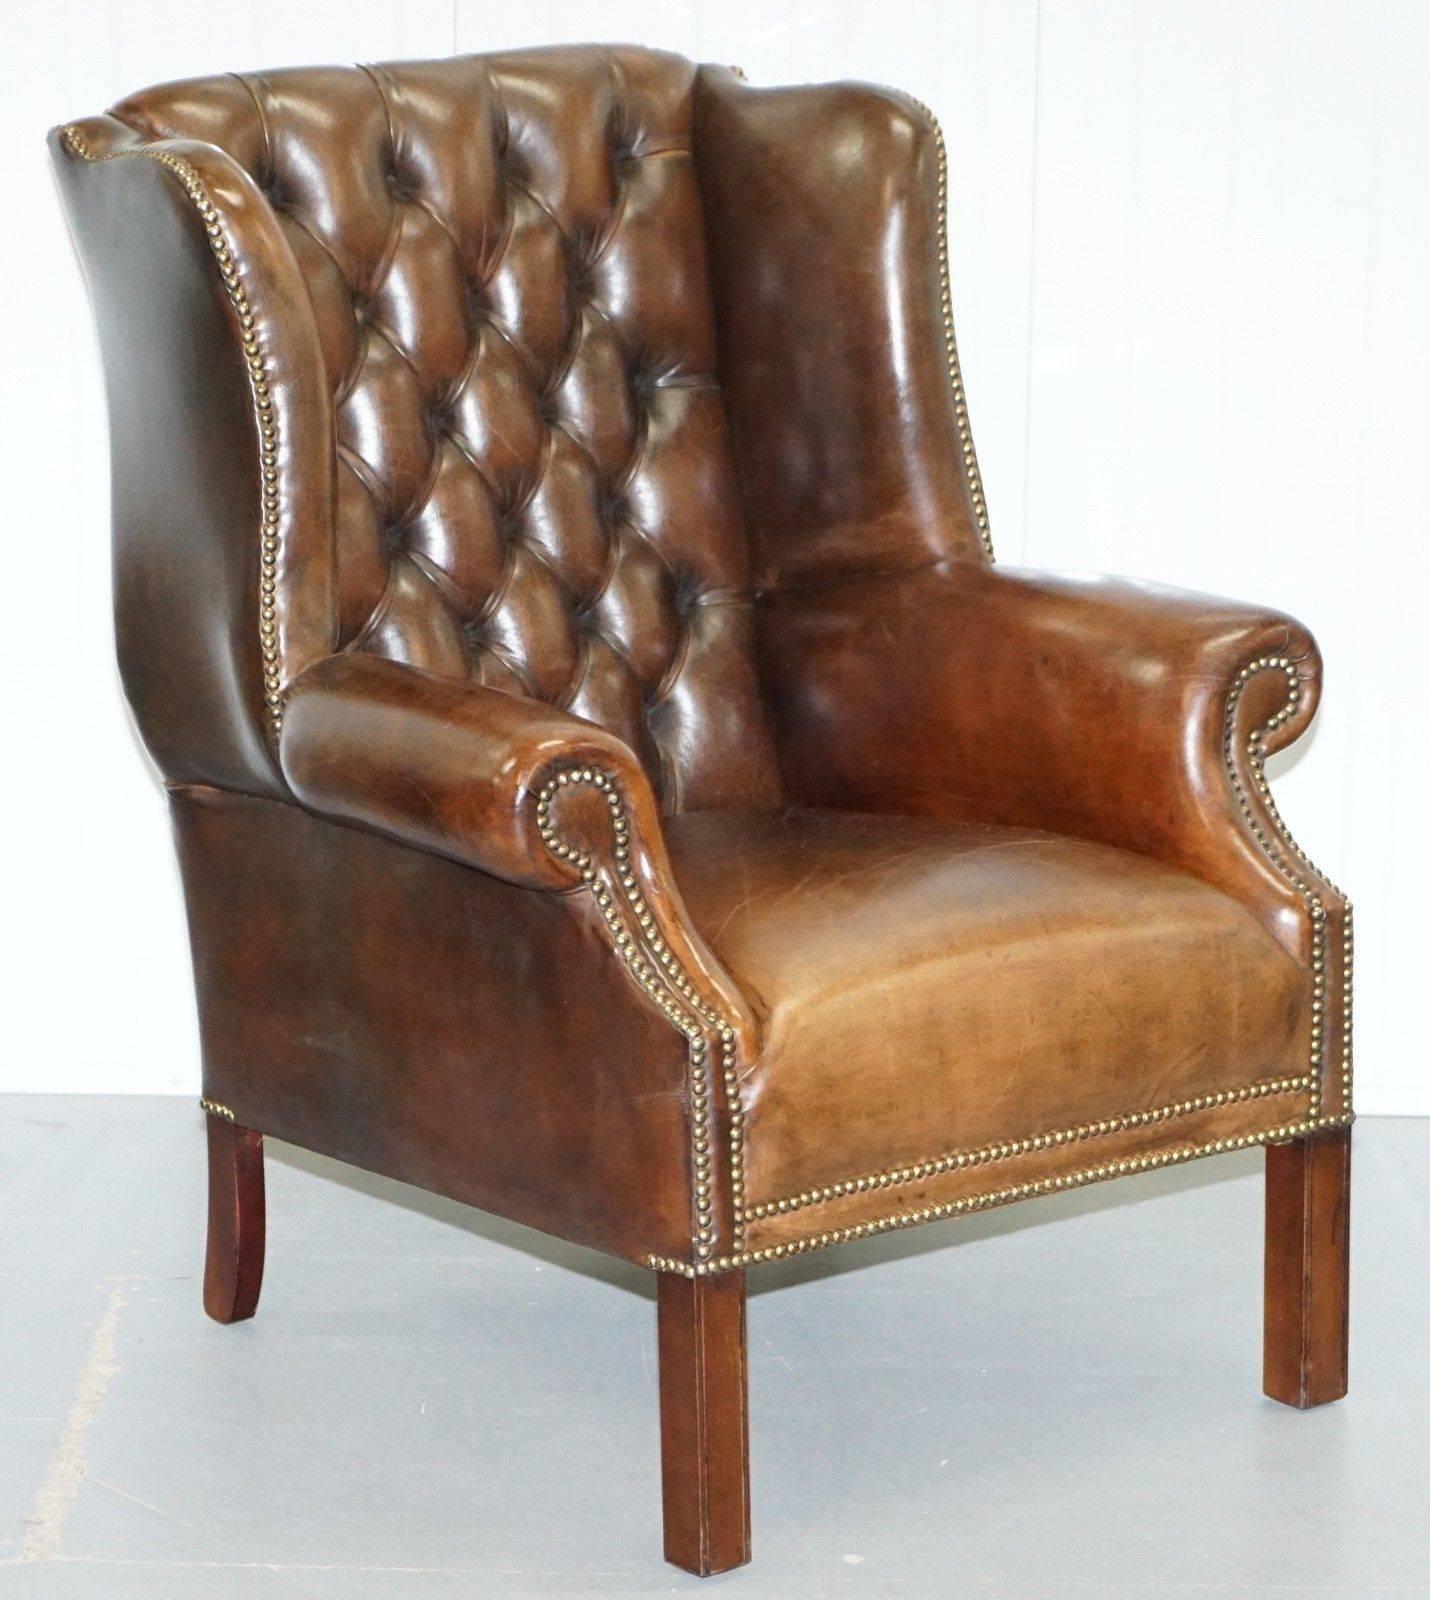 We are delighted to offer for sale this stunning pair of Vintage hand dyed cigar brown leather Chesterfield wingback armchairs and matching footstool

A lovely little suite that was fully restored 2-3 years ago, the old color was stripped out and